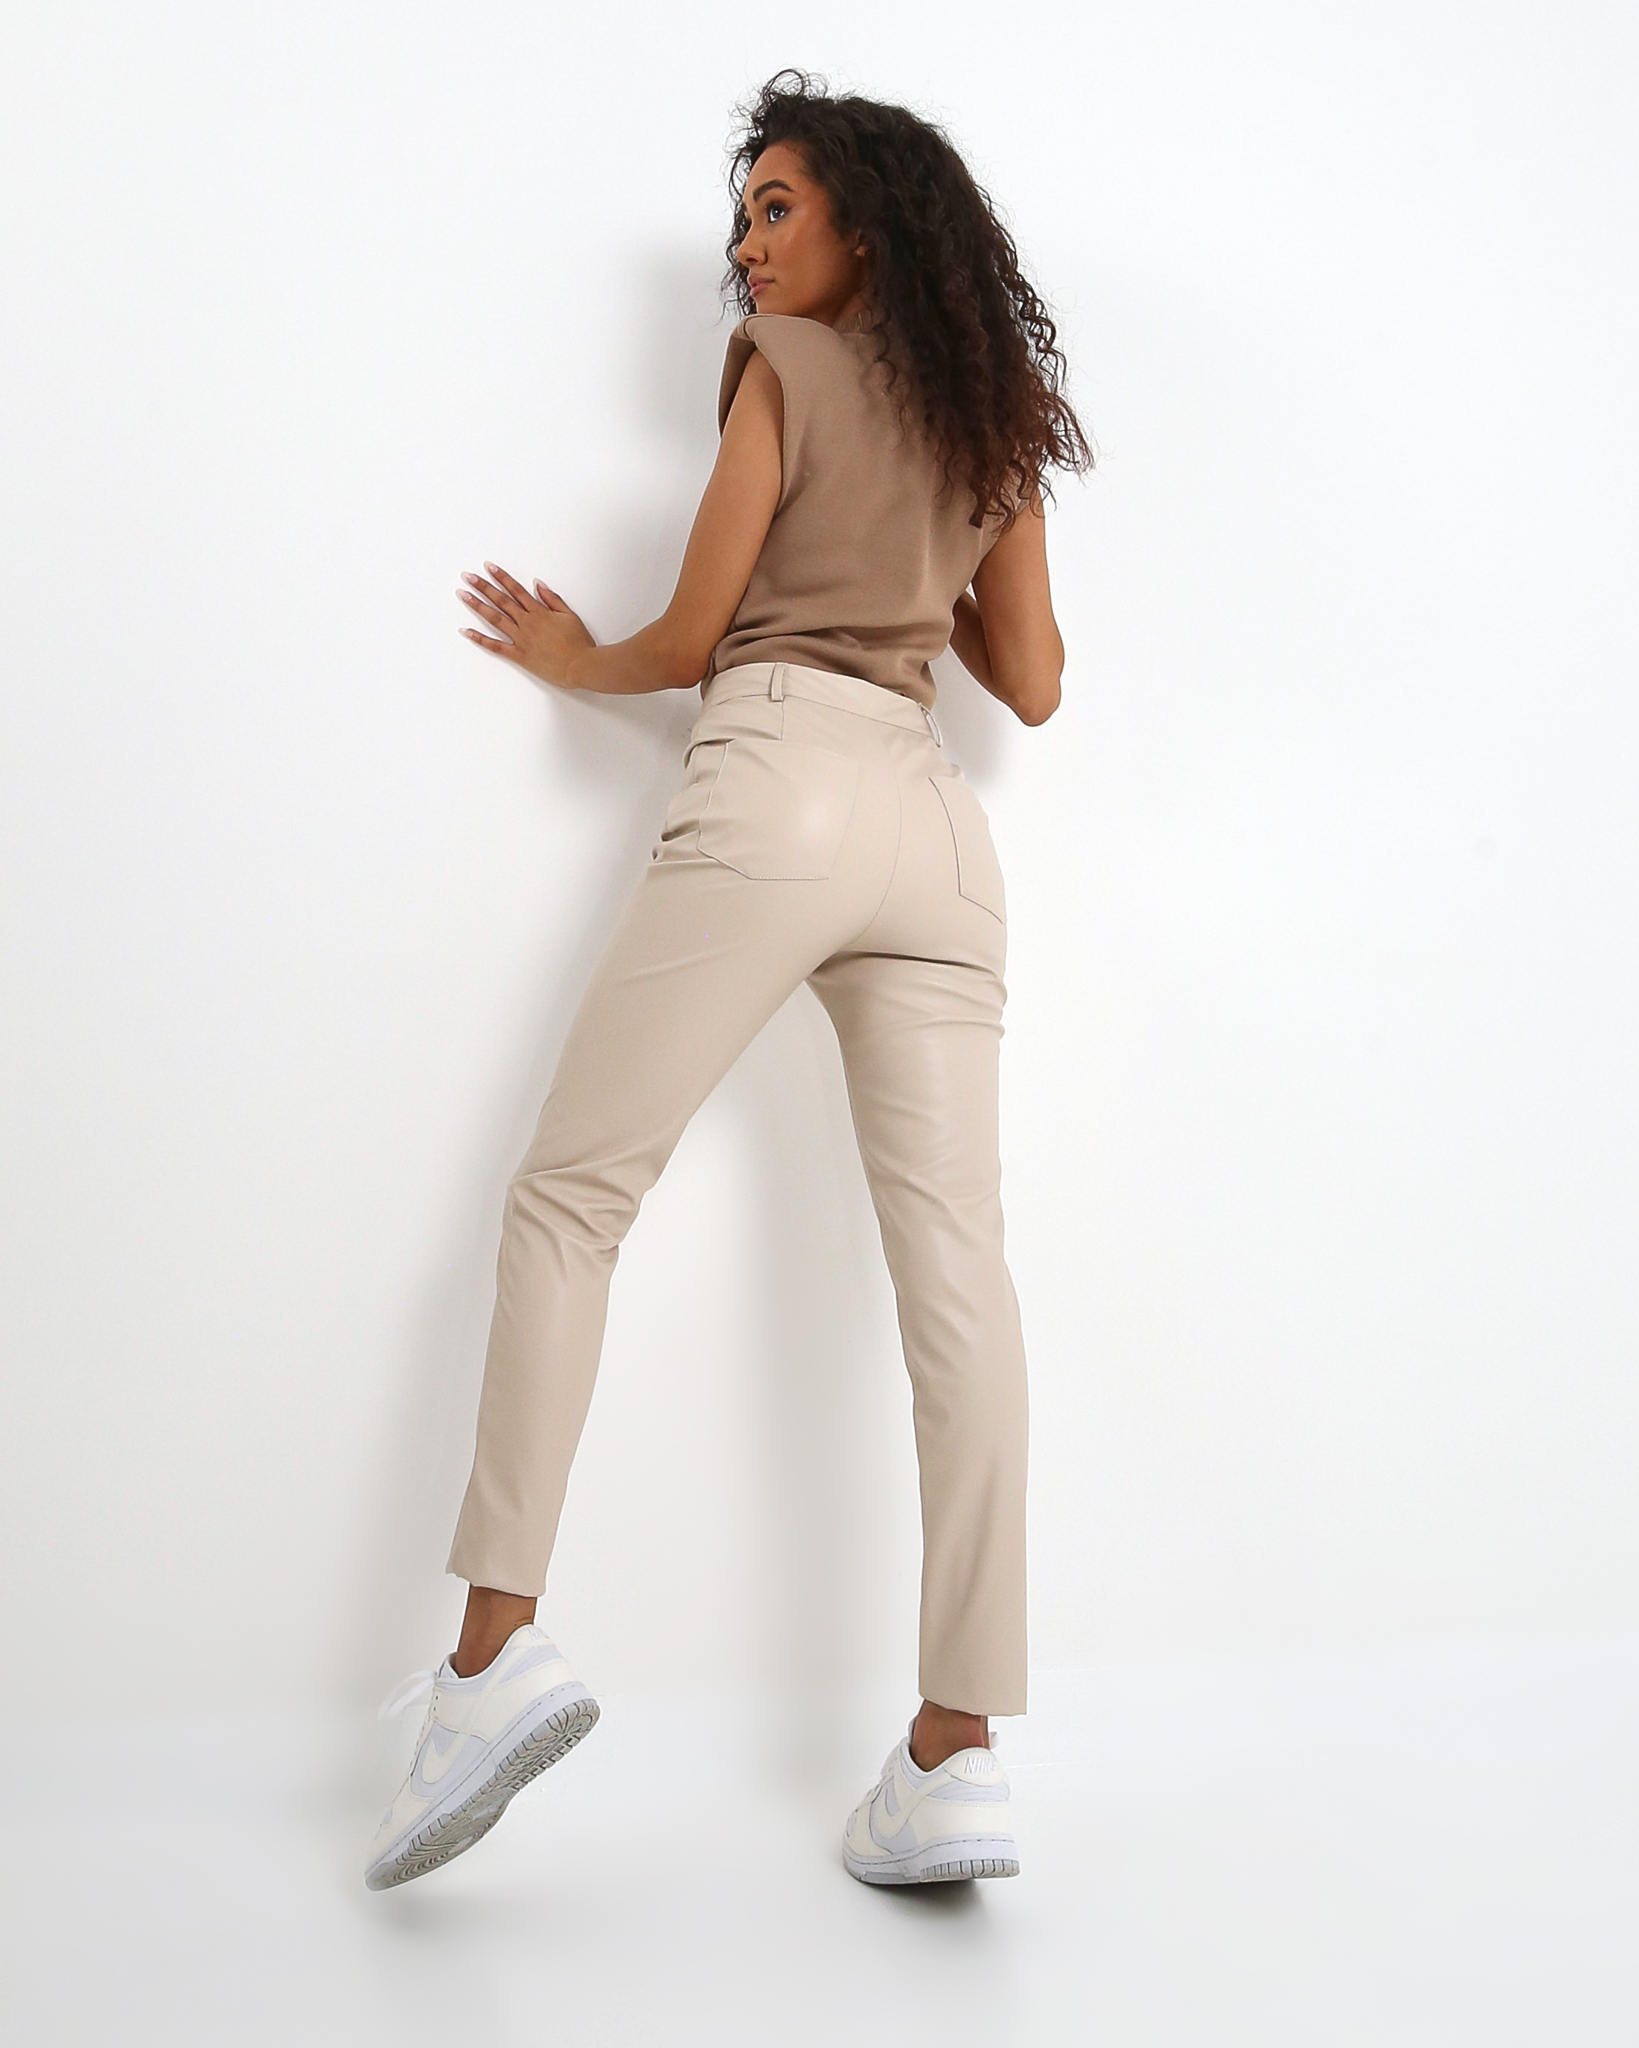 Leather Trousers  Beige  women  47 products  FASHIOLAin